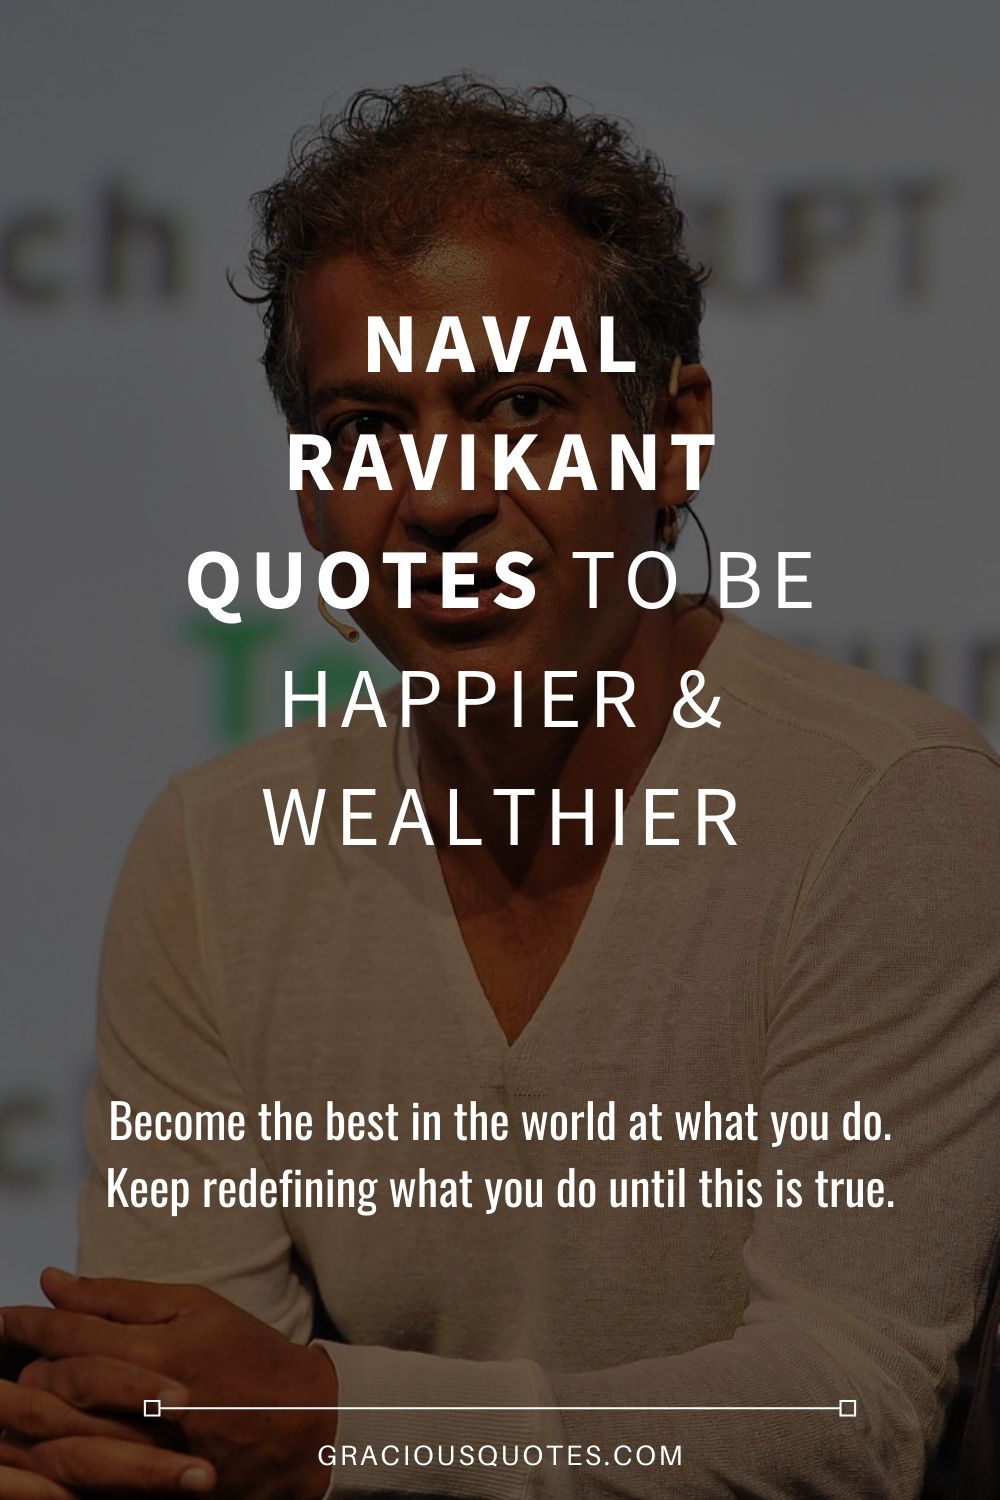 Naval Ravikant Quotes to Be Happier & Wealthier - Gracious Quotes (EDITED)